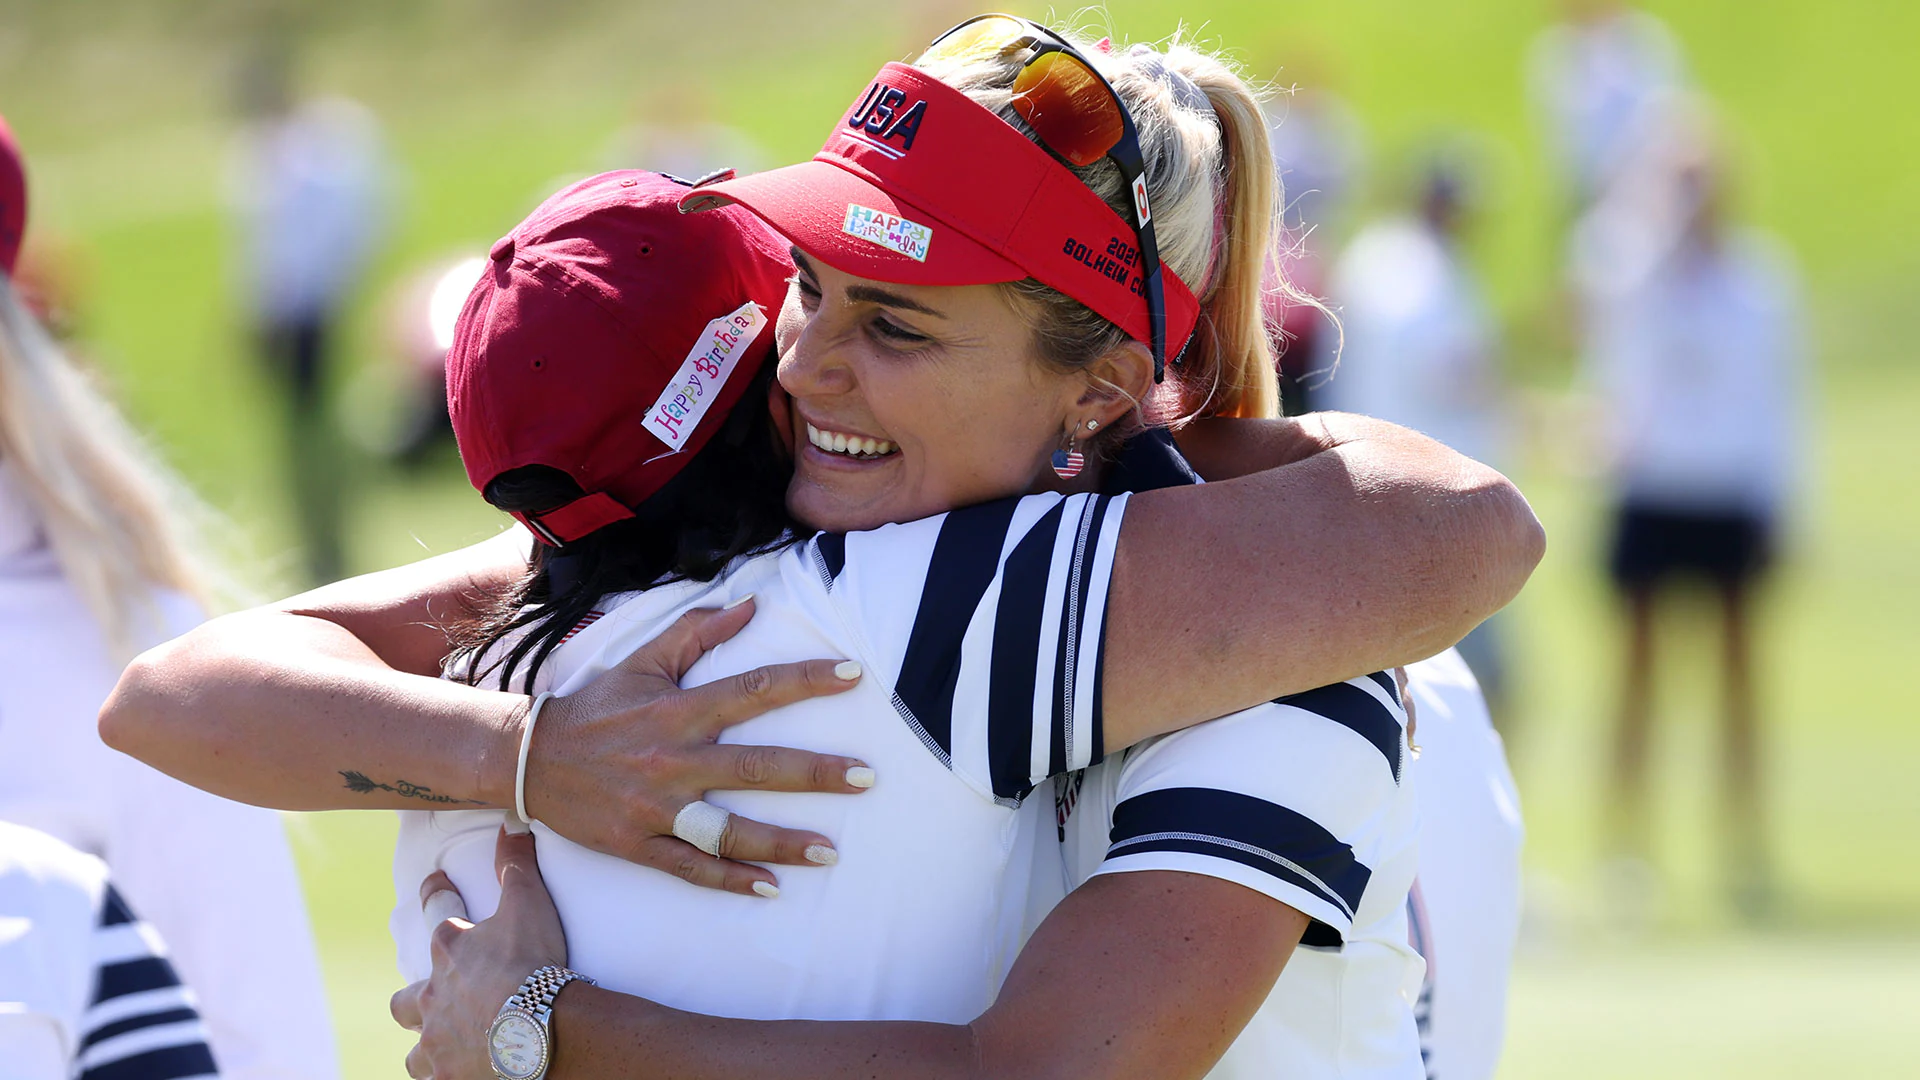 U.S. wins three morning foursomes on Day 2, cut deficit to 1 point at Solheim Cup